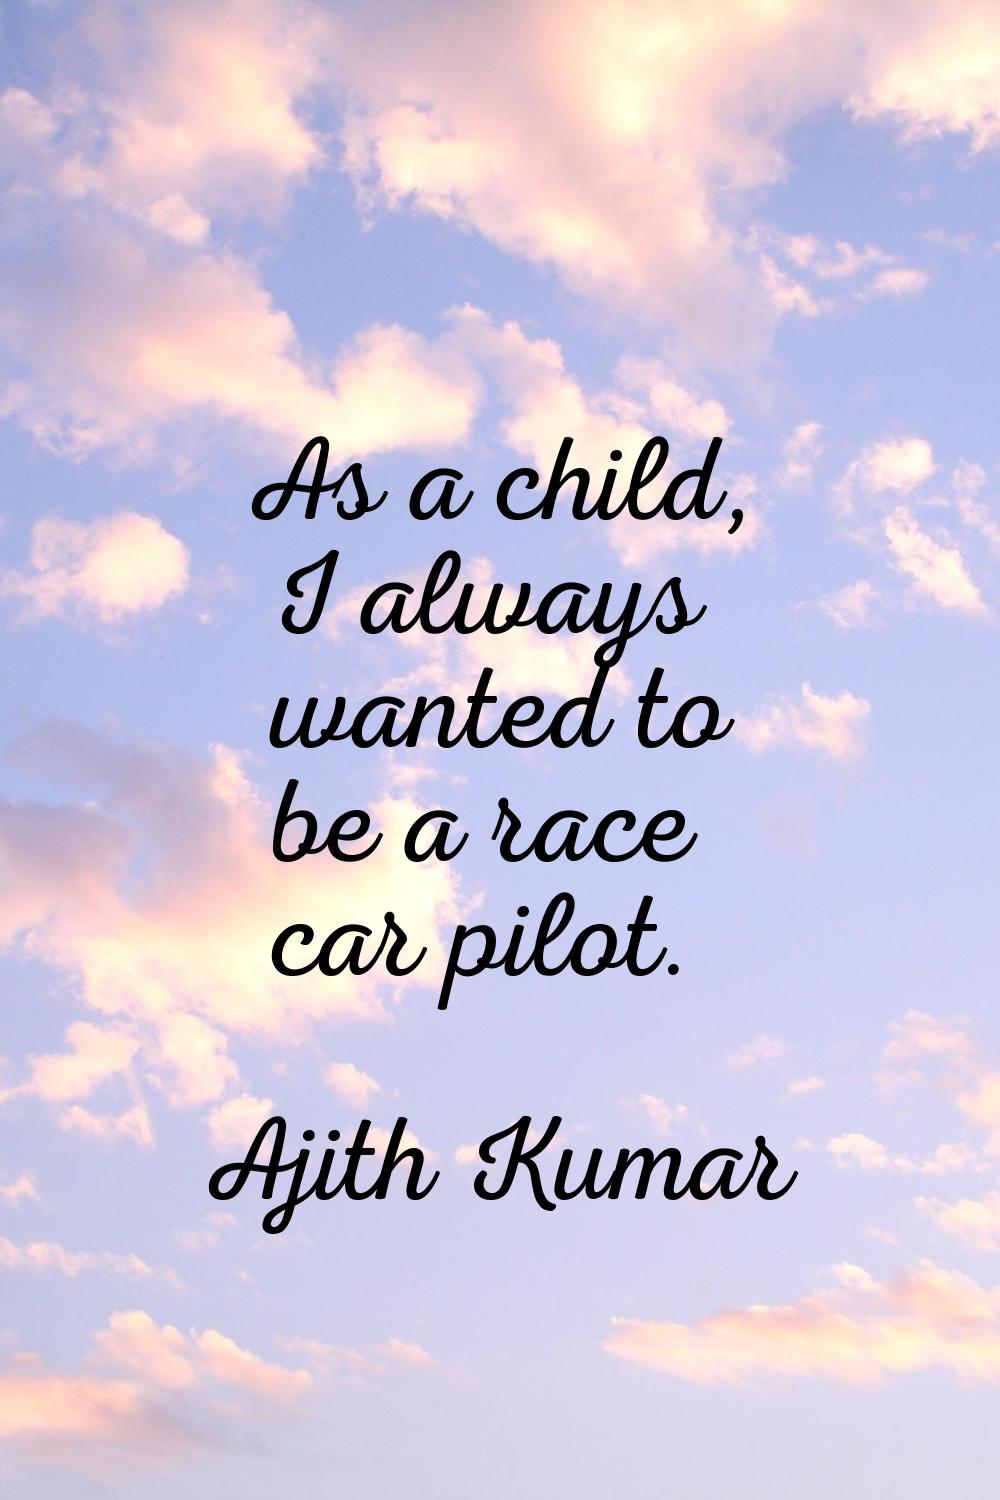 As a child, I always wanted to be a race car pilot.